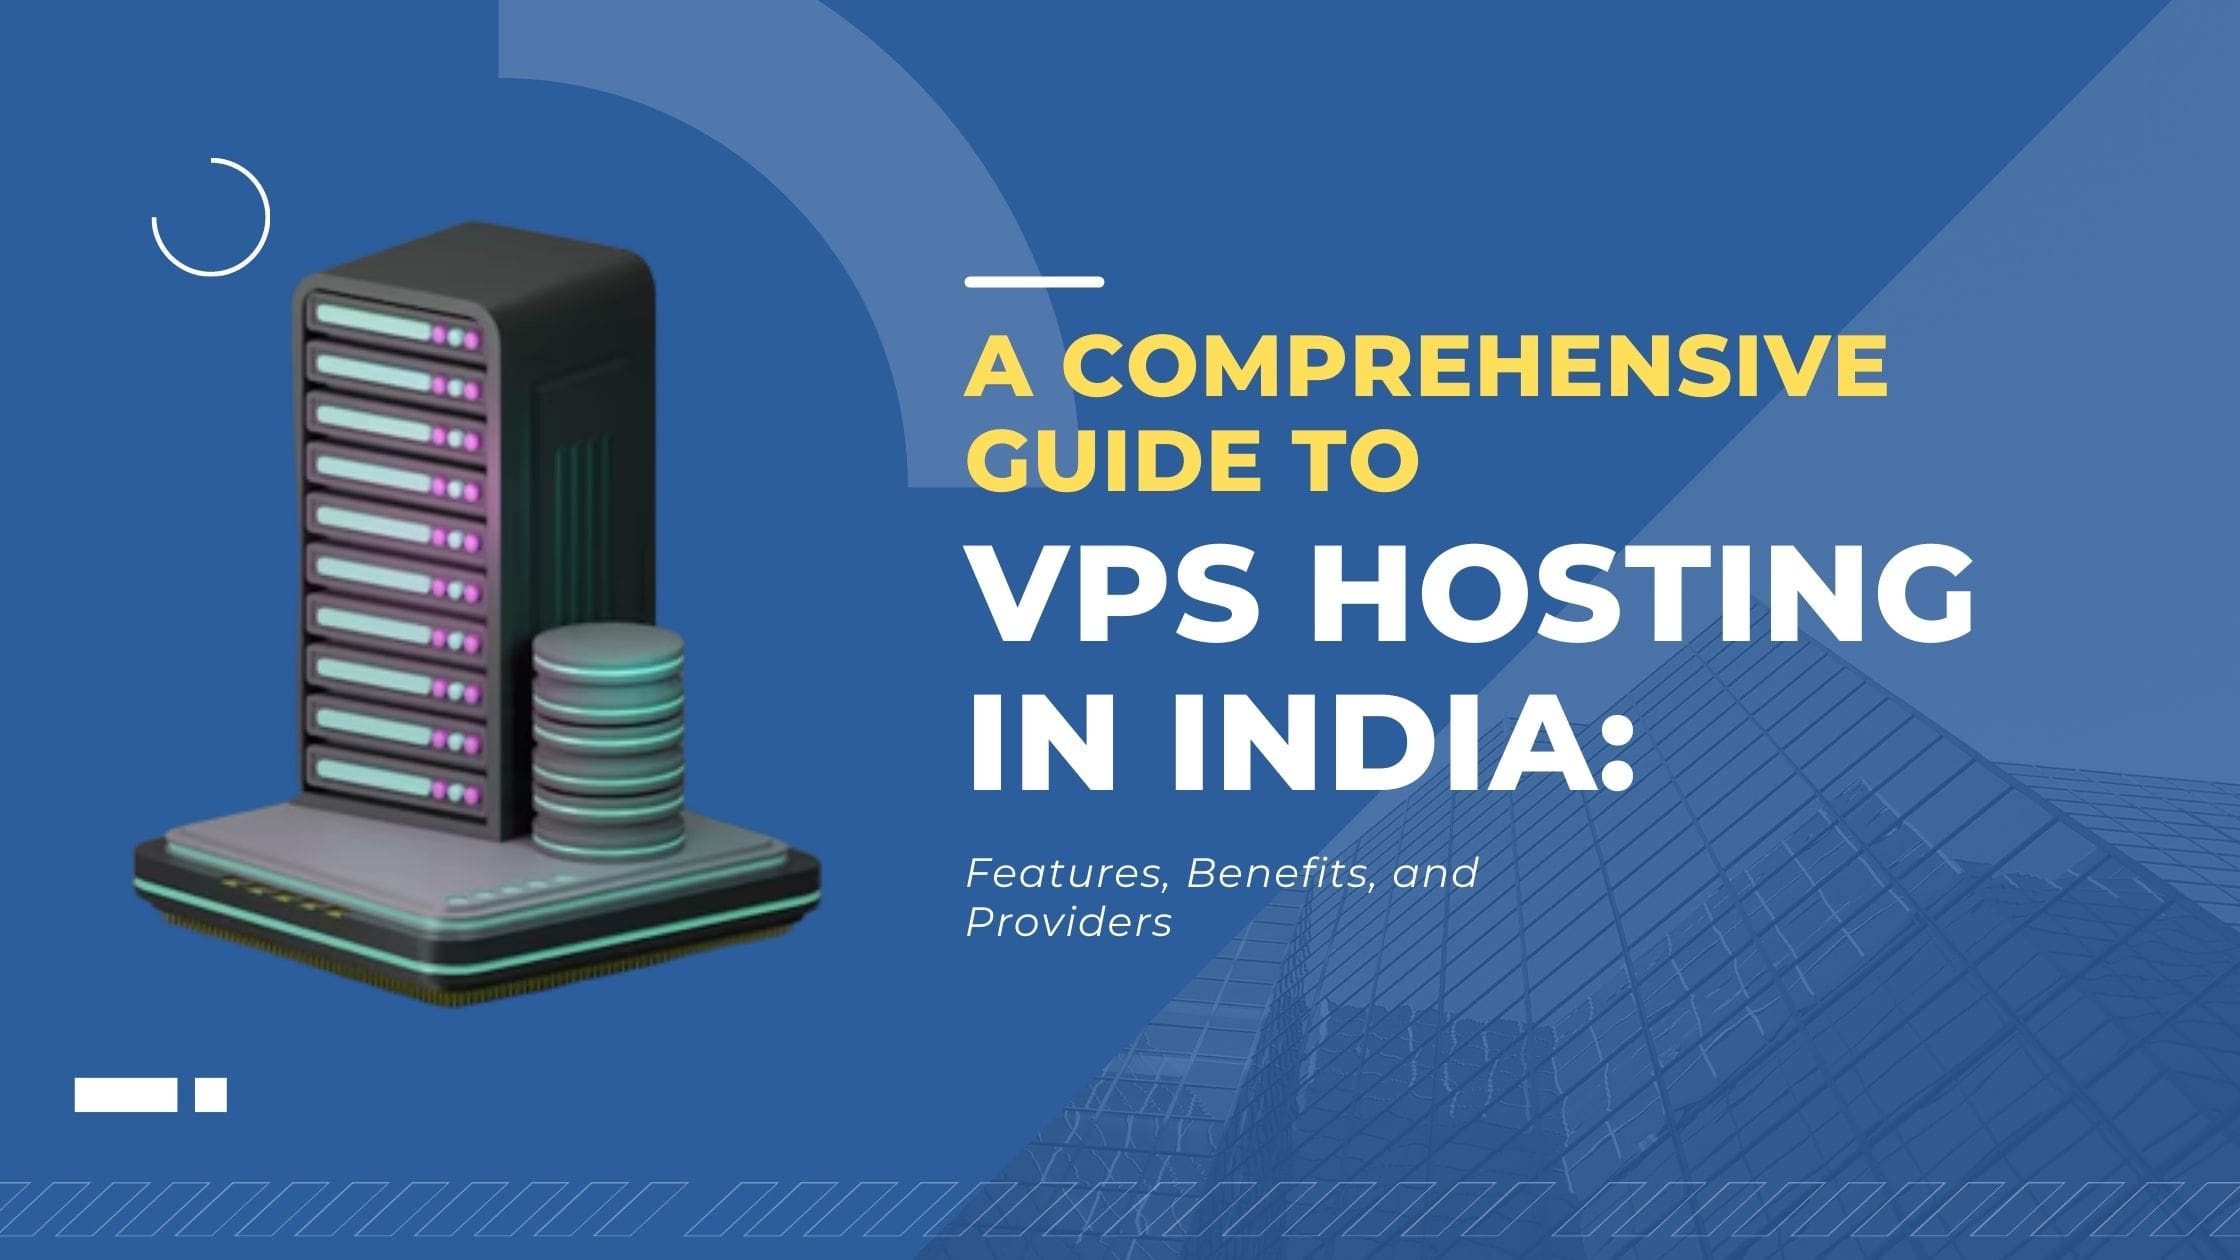 A comprehensive guide to VPS hosting in India Features, Benefits, and Providers